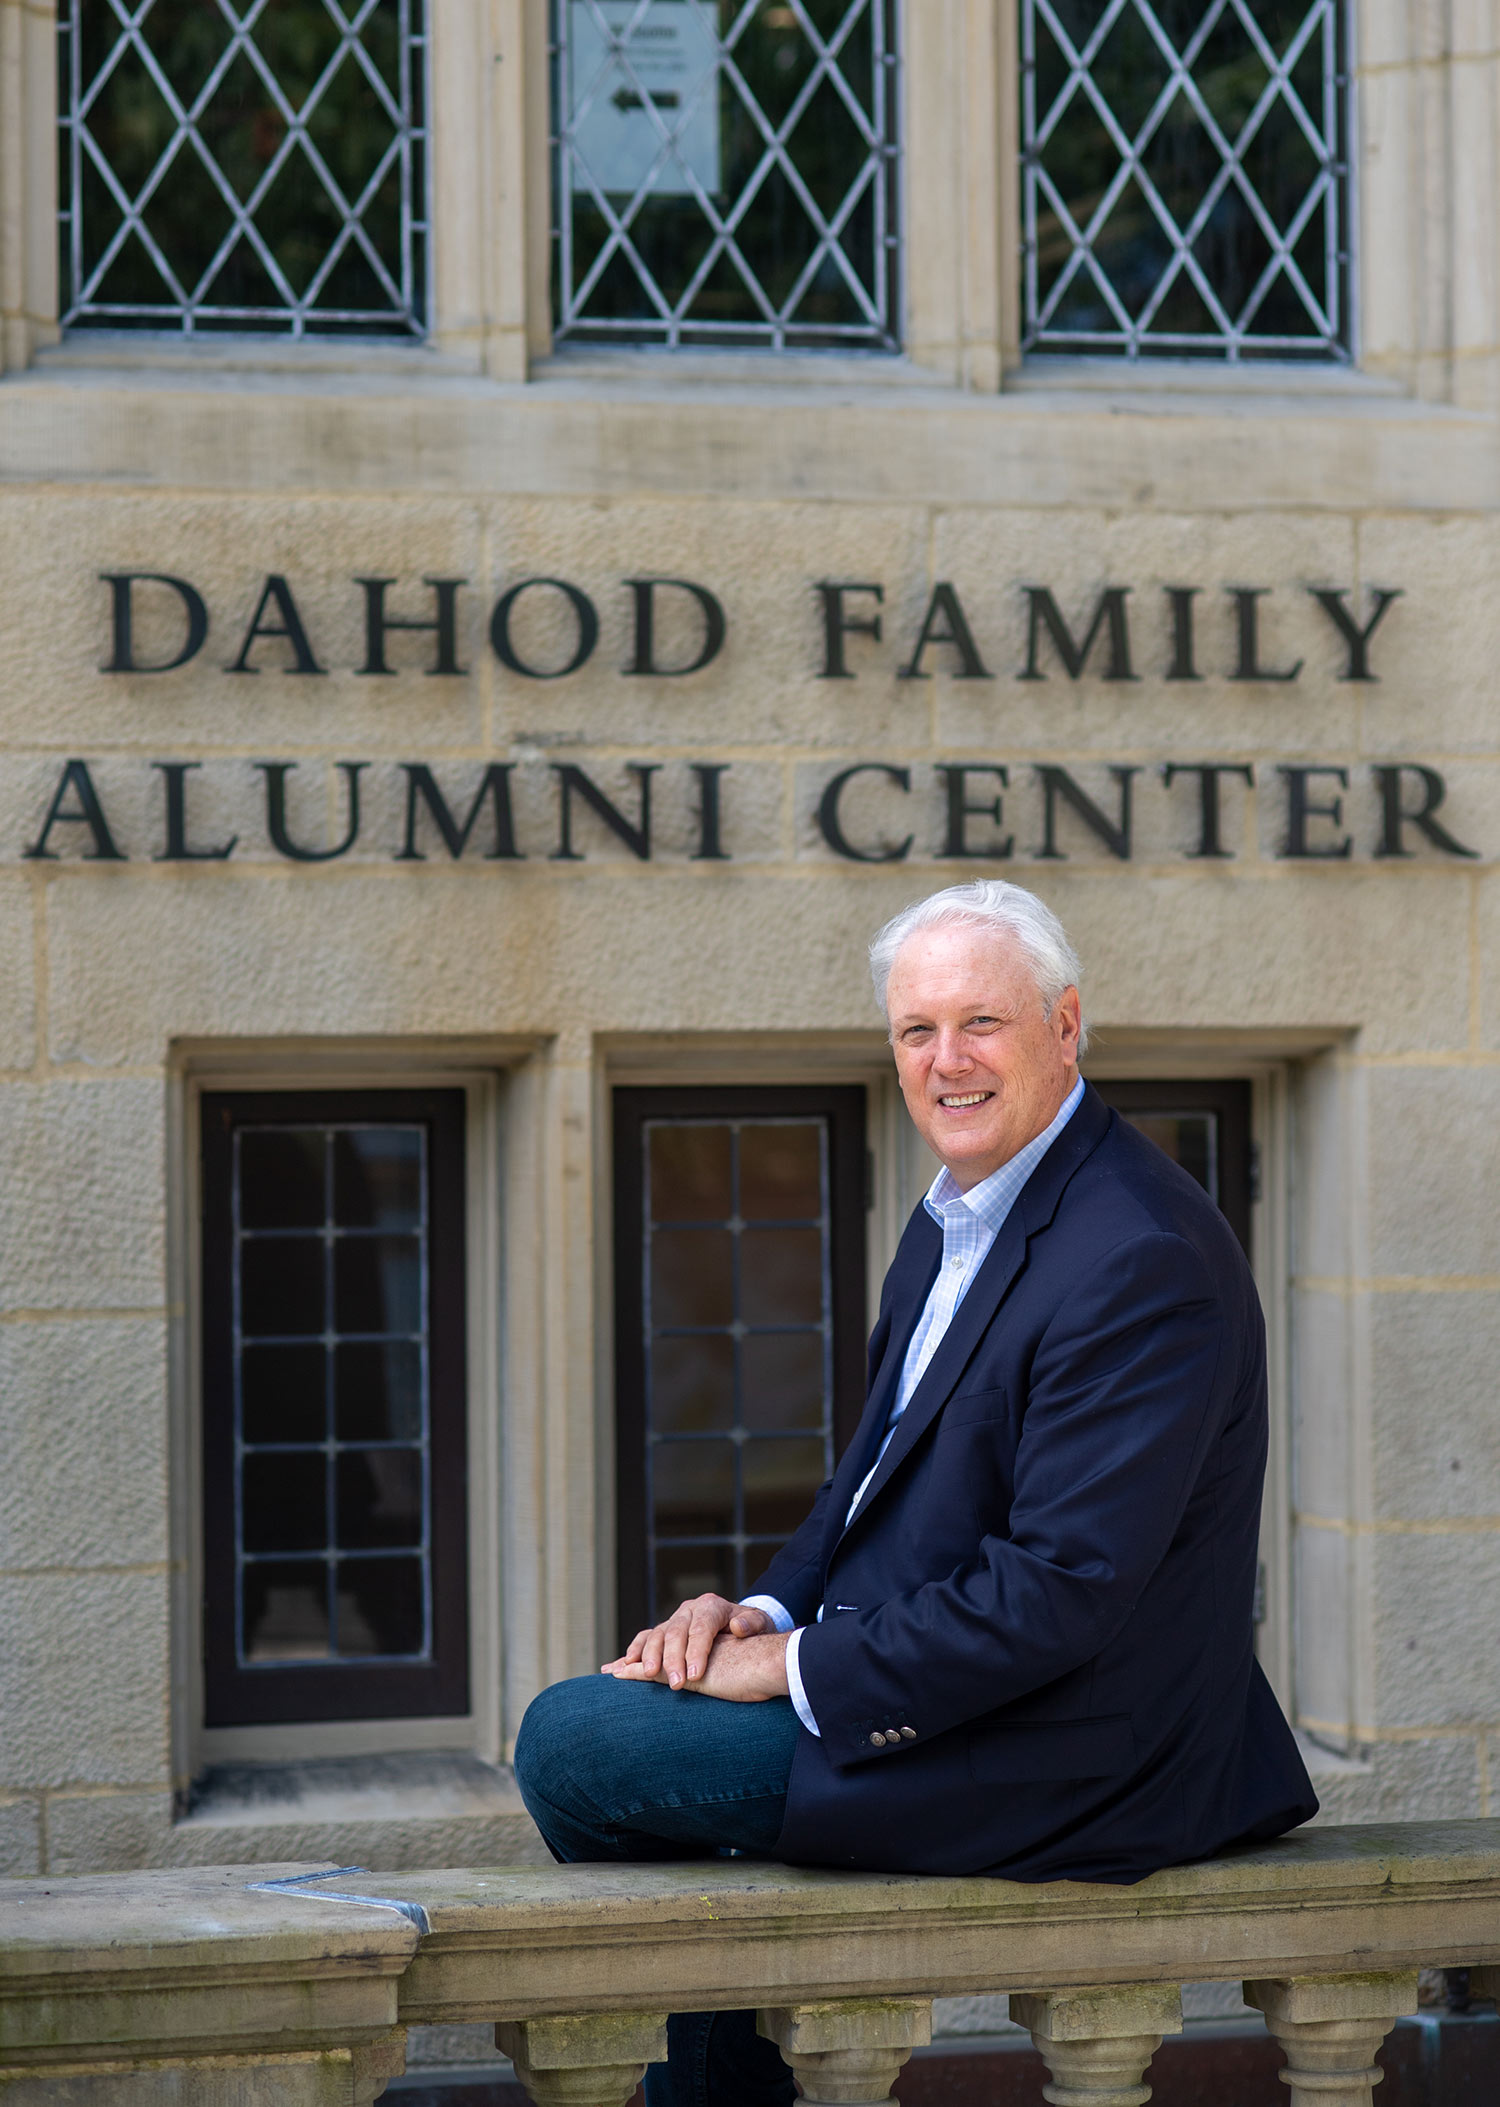 Steve Hall, VP in alumni relations who helped spearhead the hugely successful BU fund raising campaign, is retiring. Here he sits on one of the railings outside of the Dahod Family Alumni Center at the Castle on July 31, 2020. He wars a blue suits, and ornate windows are seen on the building behind hime with the sign "Dahod Family Alumni Center"